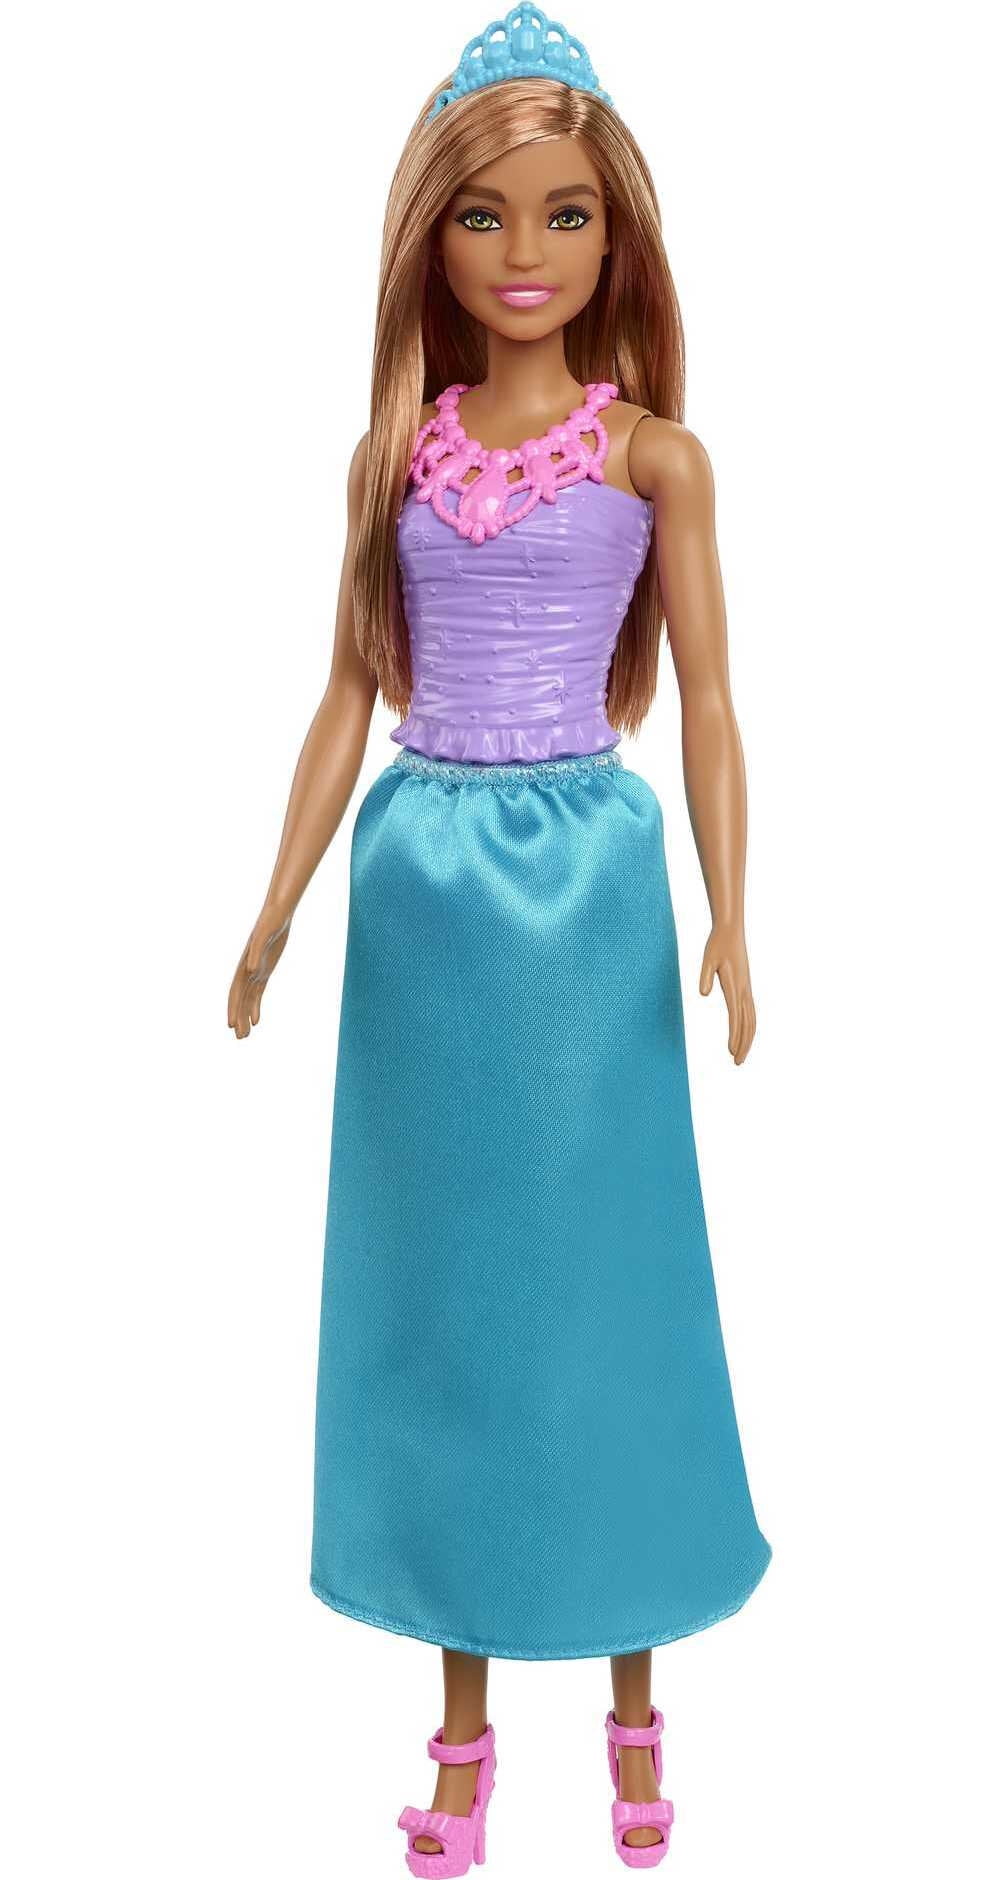 Barbie Dreamtopia Doll & Accessories, Brunette Hair with Removable Blue Skirt, Shoes & Tiara